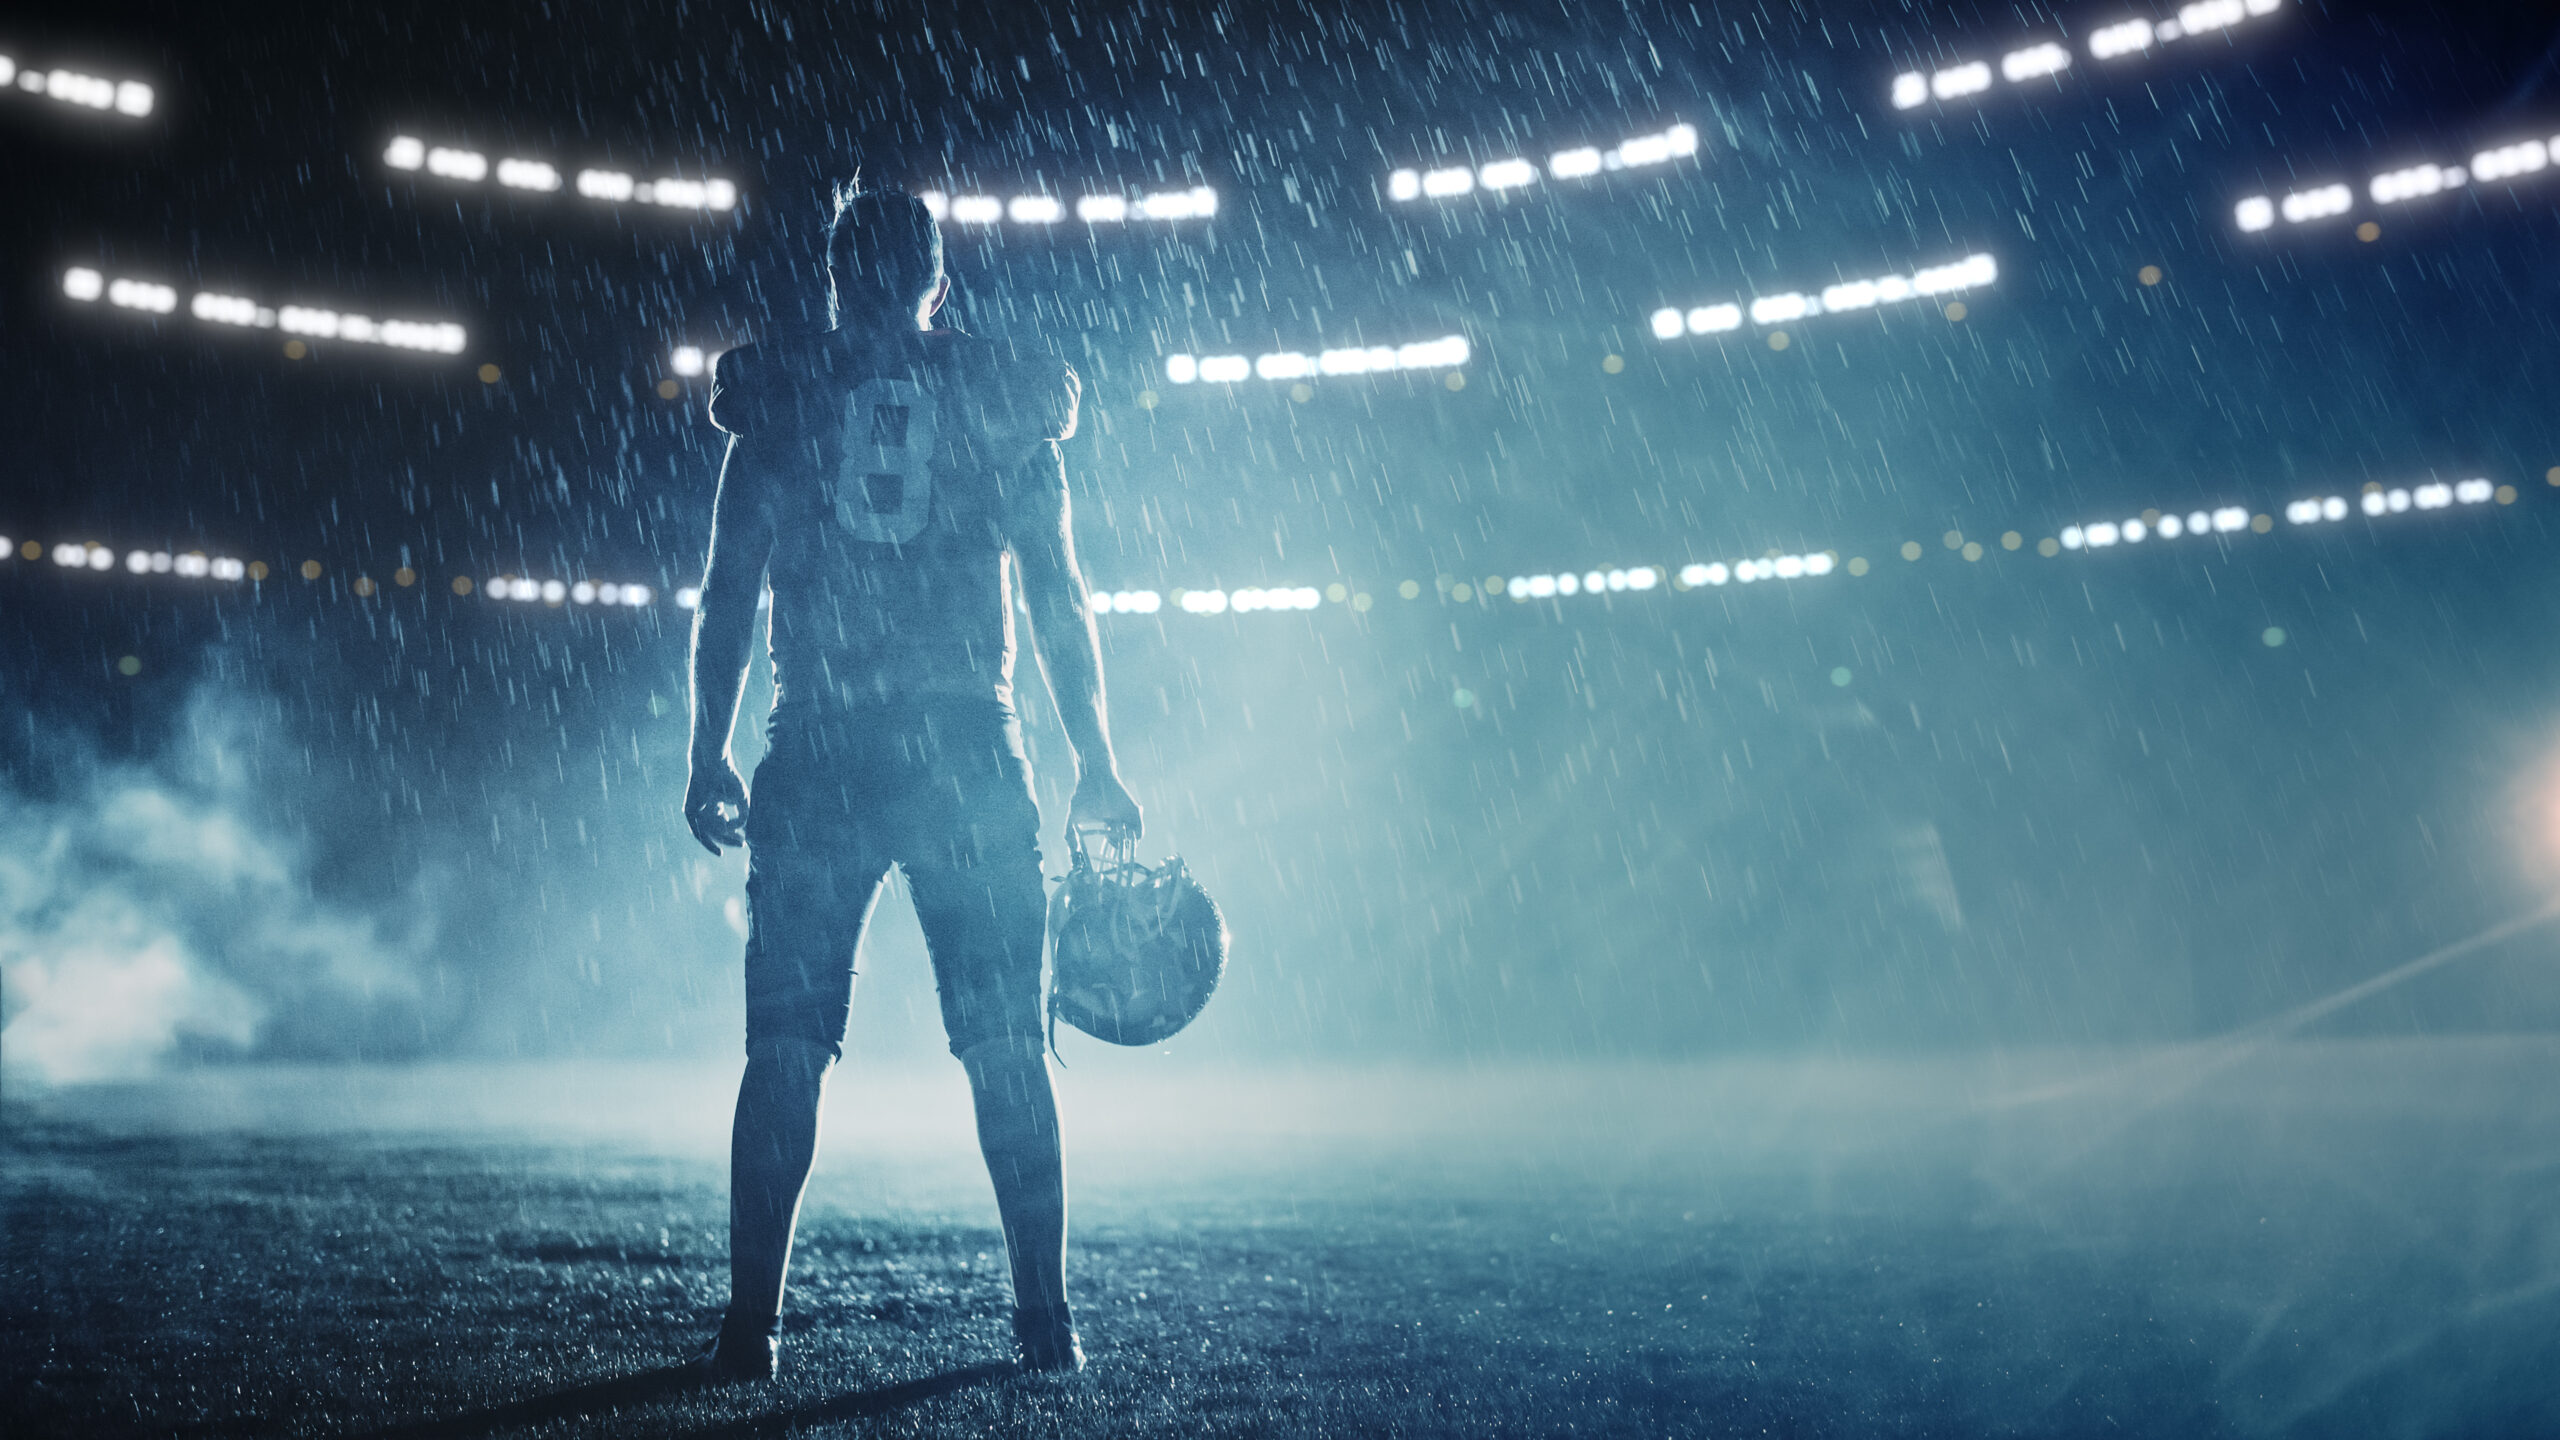 American Football Stadium: Lonely Athlete Warrior Standing on a Field Holds his Helmet.